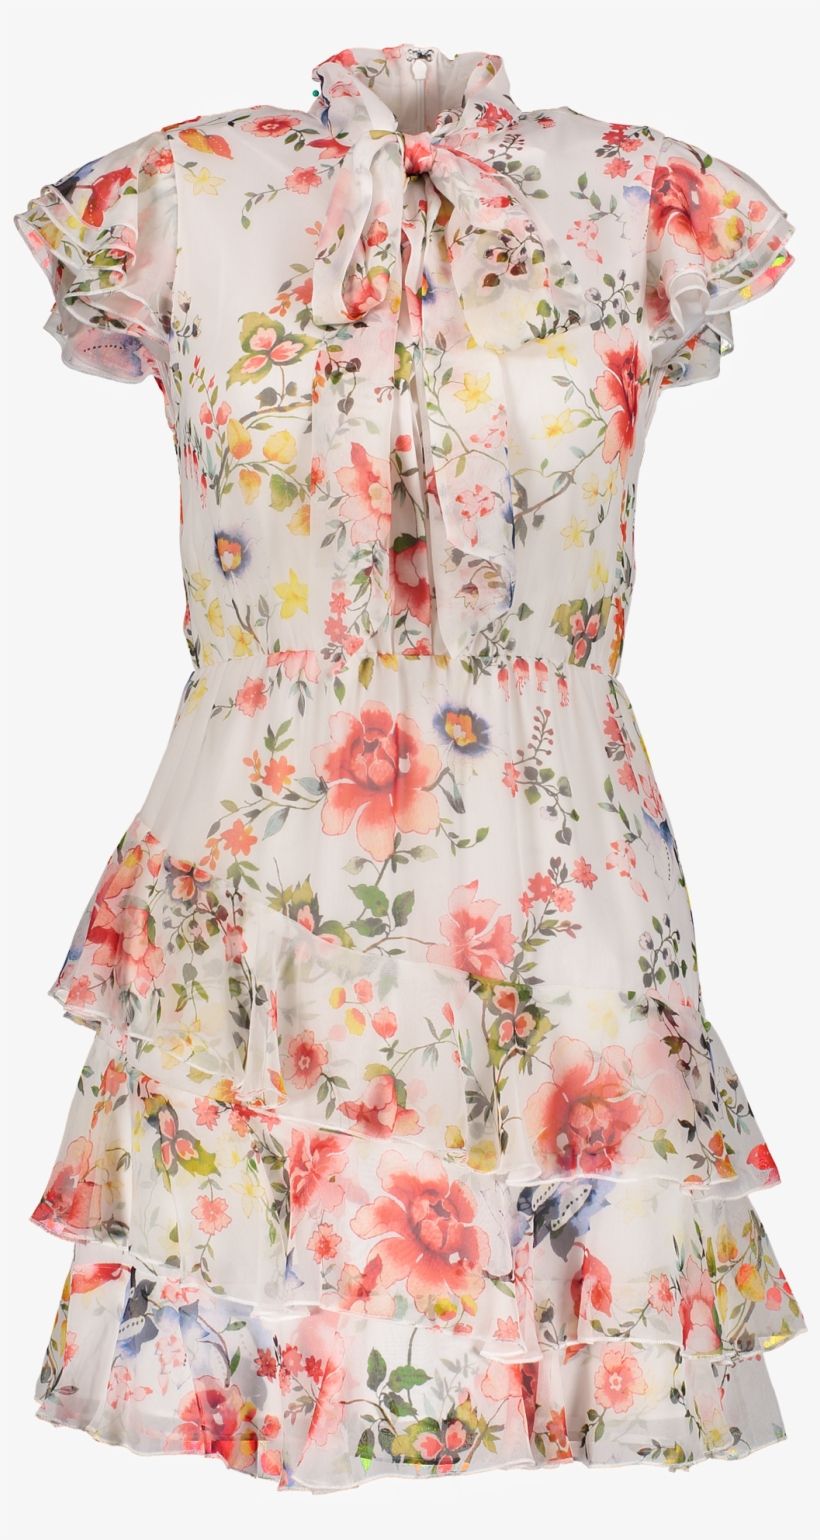 Lessie Tie Ruffle Dress Off White - Lessie Ruffled Floral Silk Dress Alice Olivia, transparent png #5326939